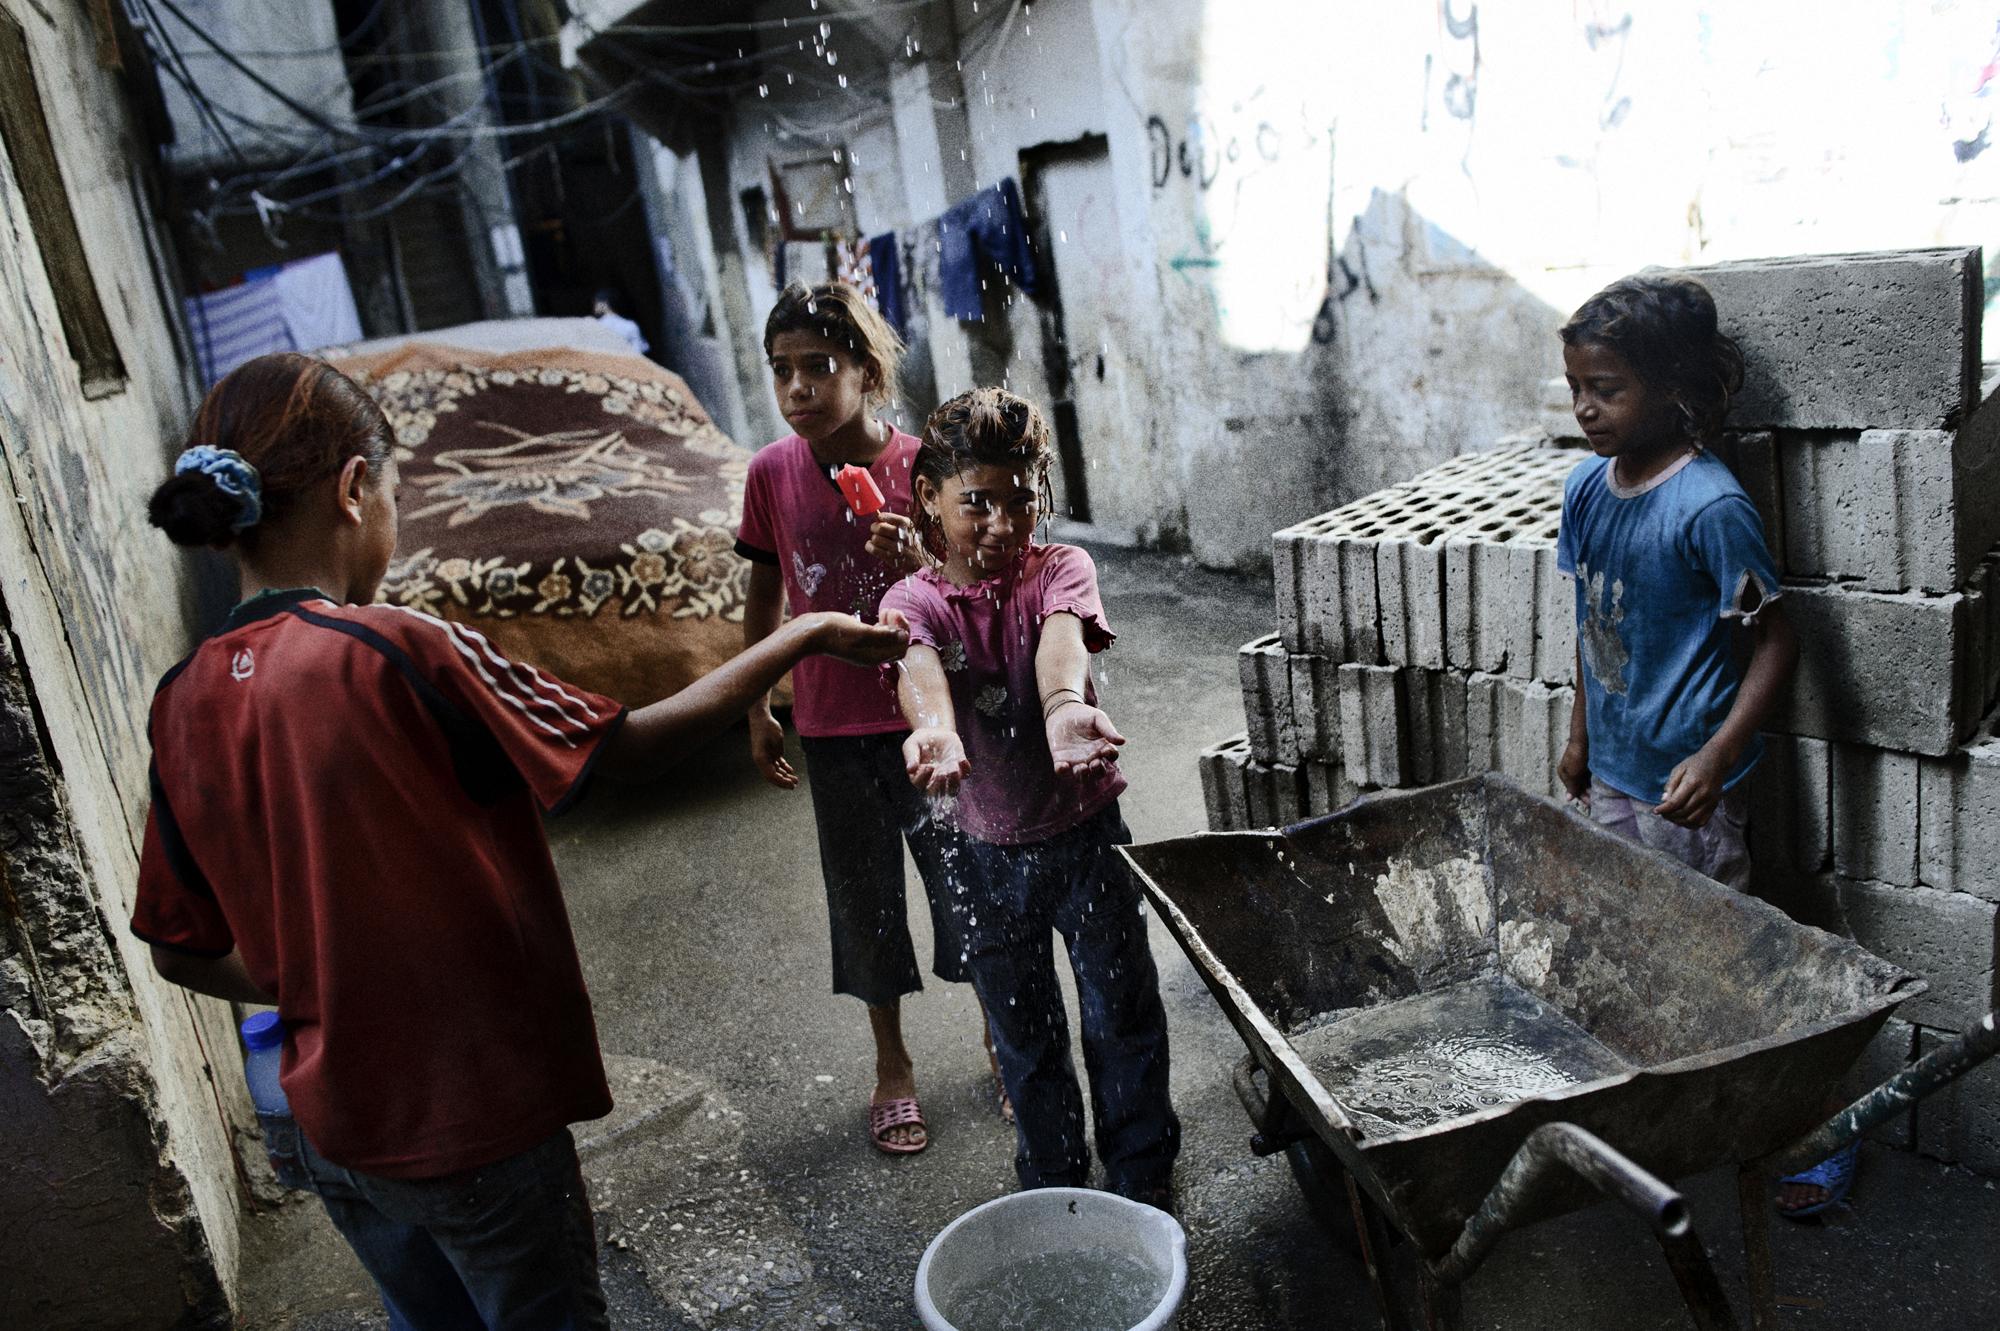 Young Syrian refugees collect water from a leaking water hose in the overcrowded Beirut outskirts Sabra and Shatila in Lebanon, home to refugees from the occupied Palestinian territories, Syria, Armenia, and foreign domestic workers from the Philippiâ€‹nes, Sudan and Sri Lanka.